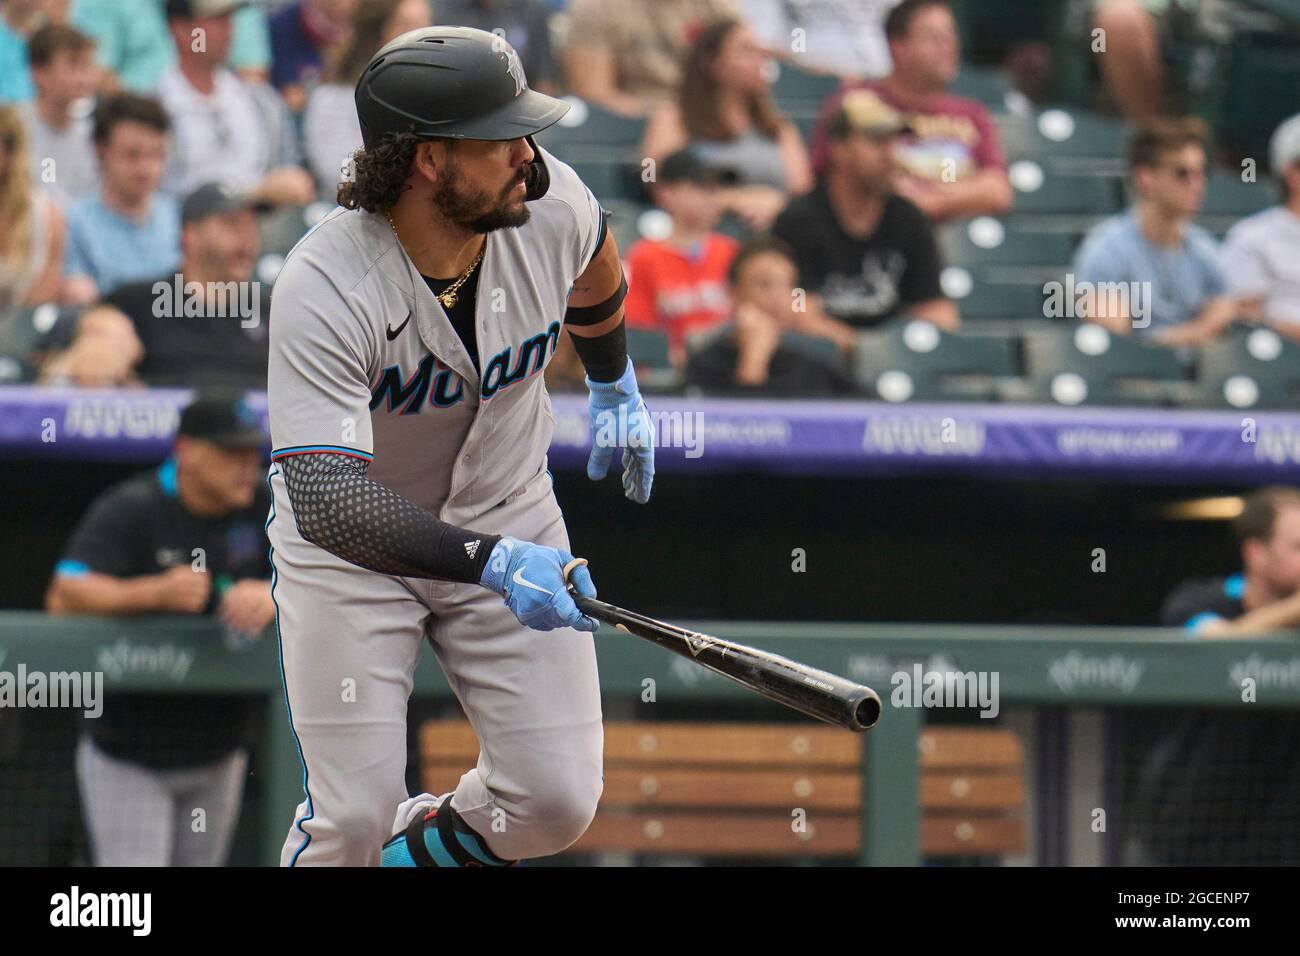 Denver, USA. August 7 2021: Miami left fielder Jorge Alfaro (38) gets a hit  during the game with the Colorado Rockies and Miami Marlins held at Coors  Field in Denver Co. David